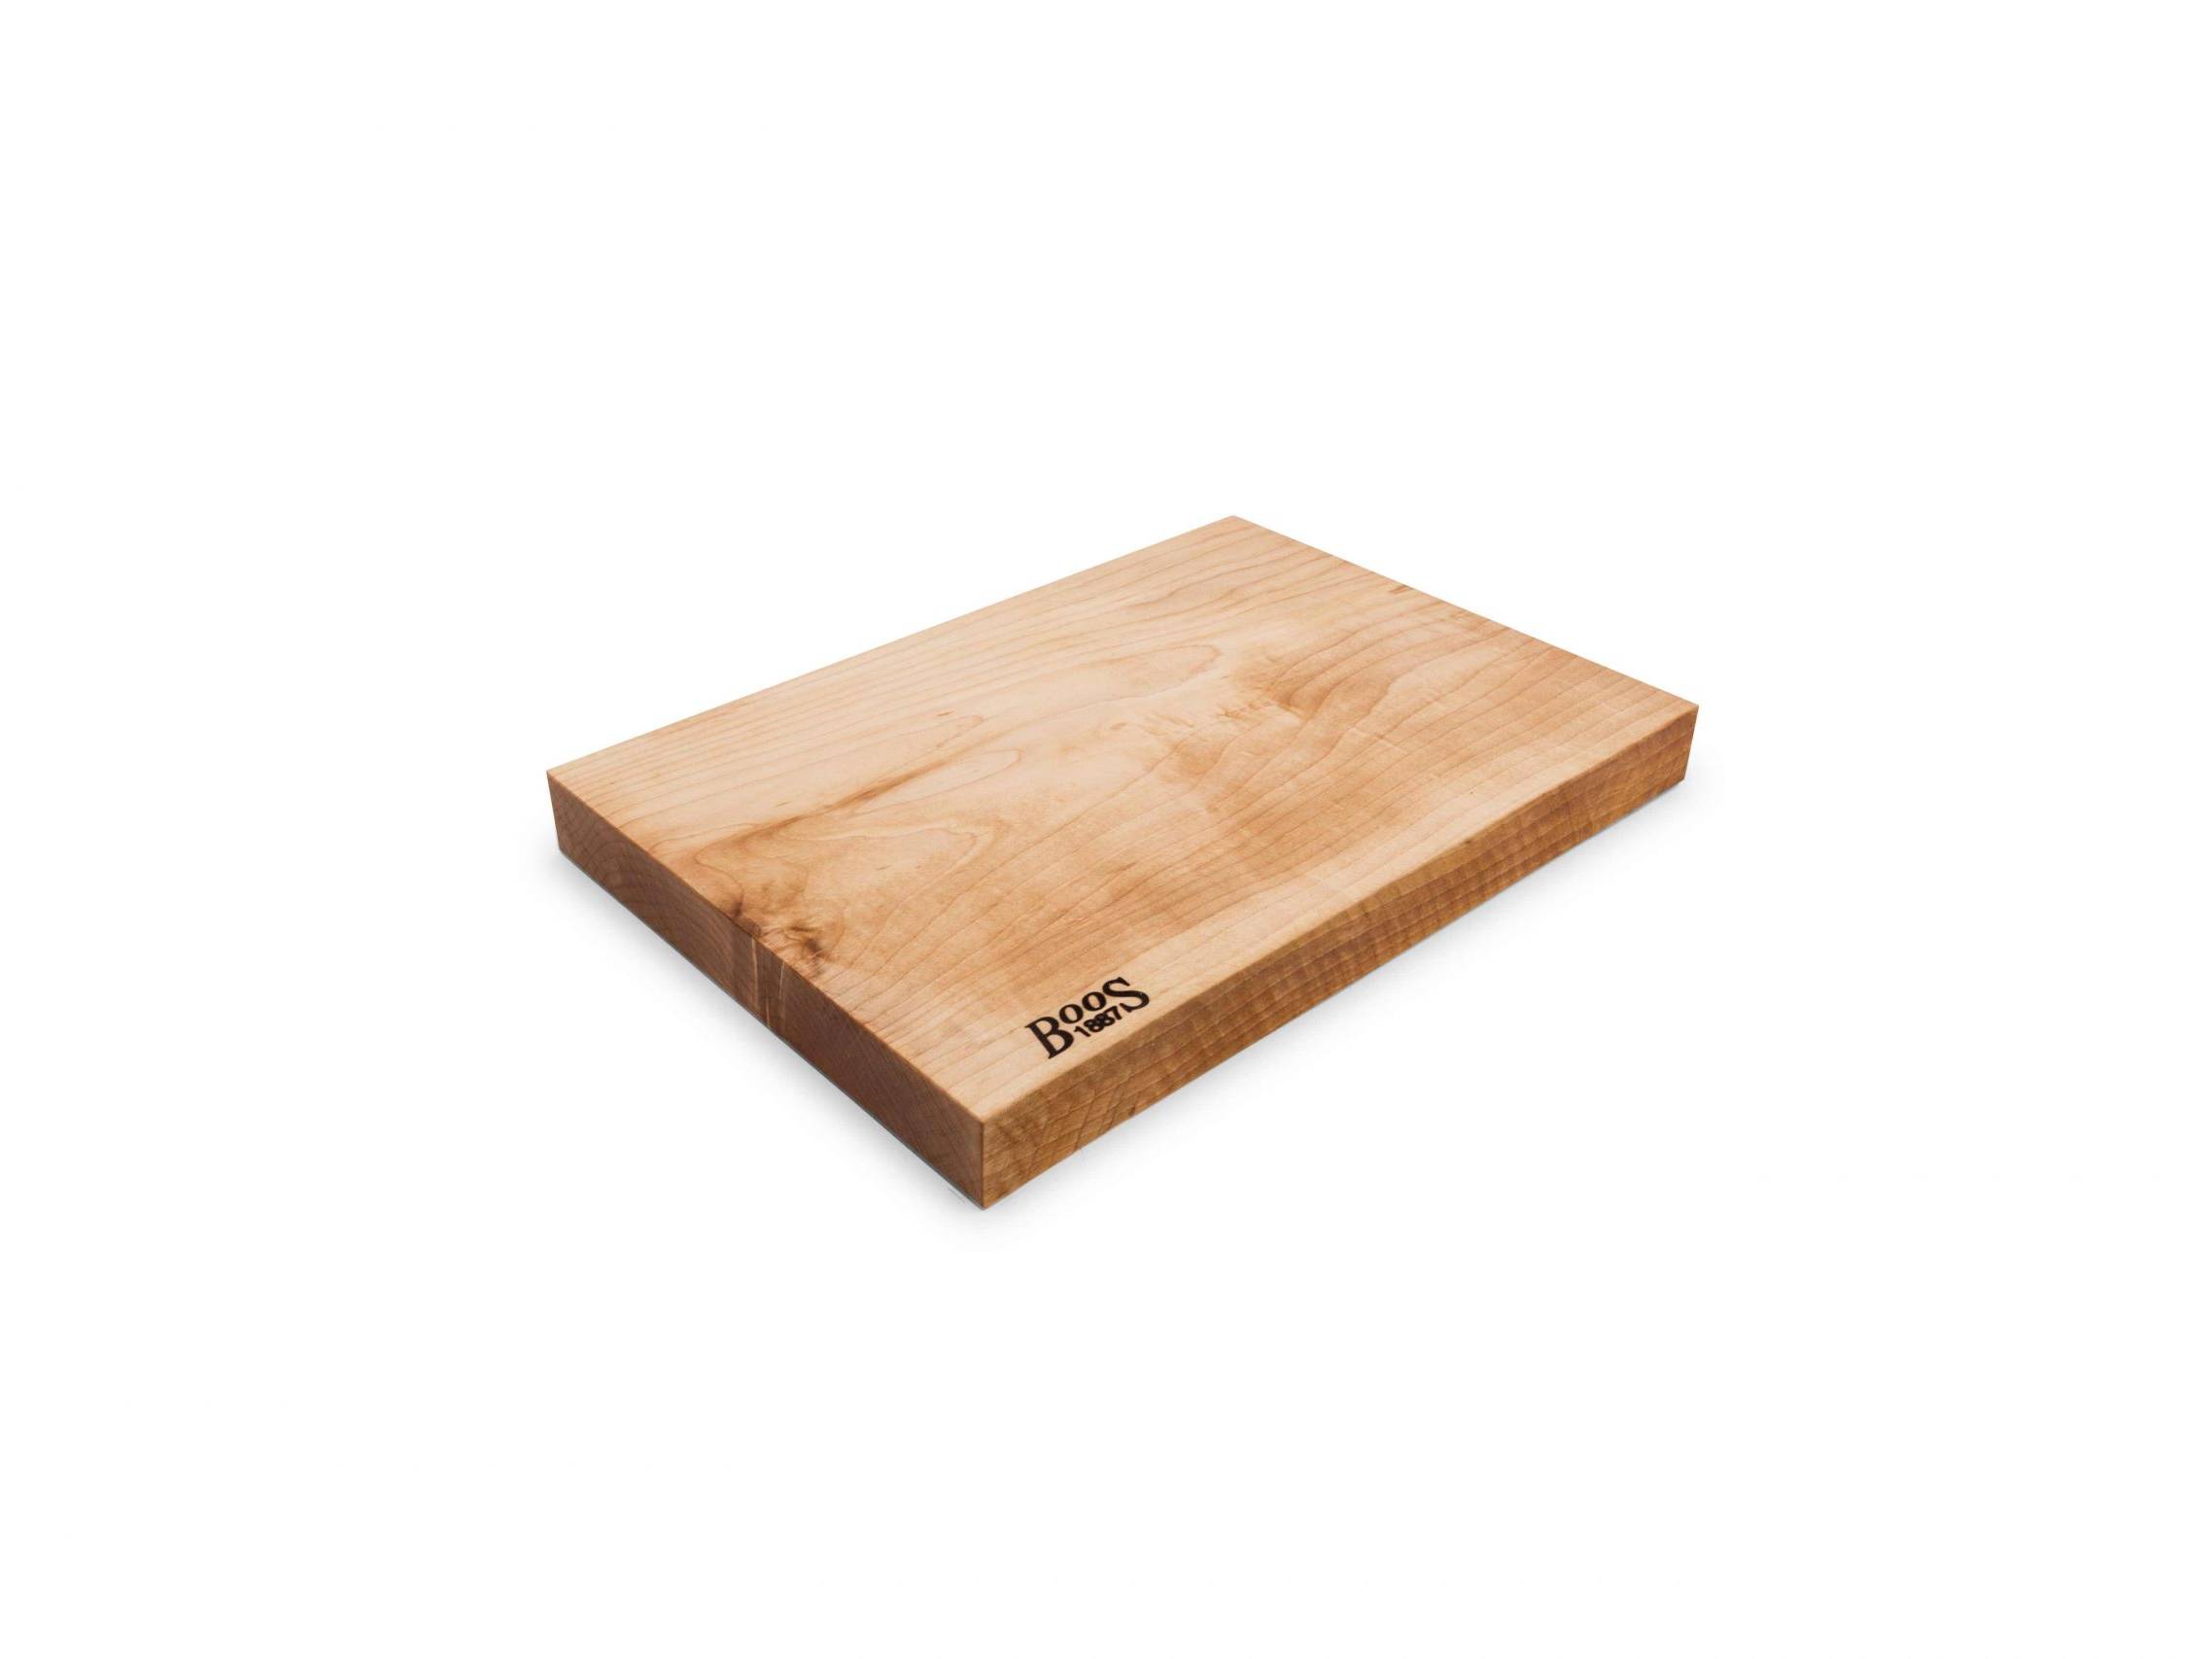 Boos 1887 / Rustic Edge one piece cutting board; hard maple; can be used on both sides 57